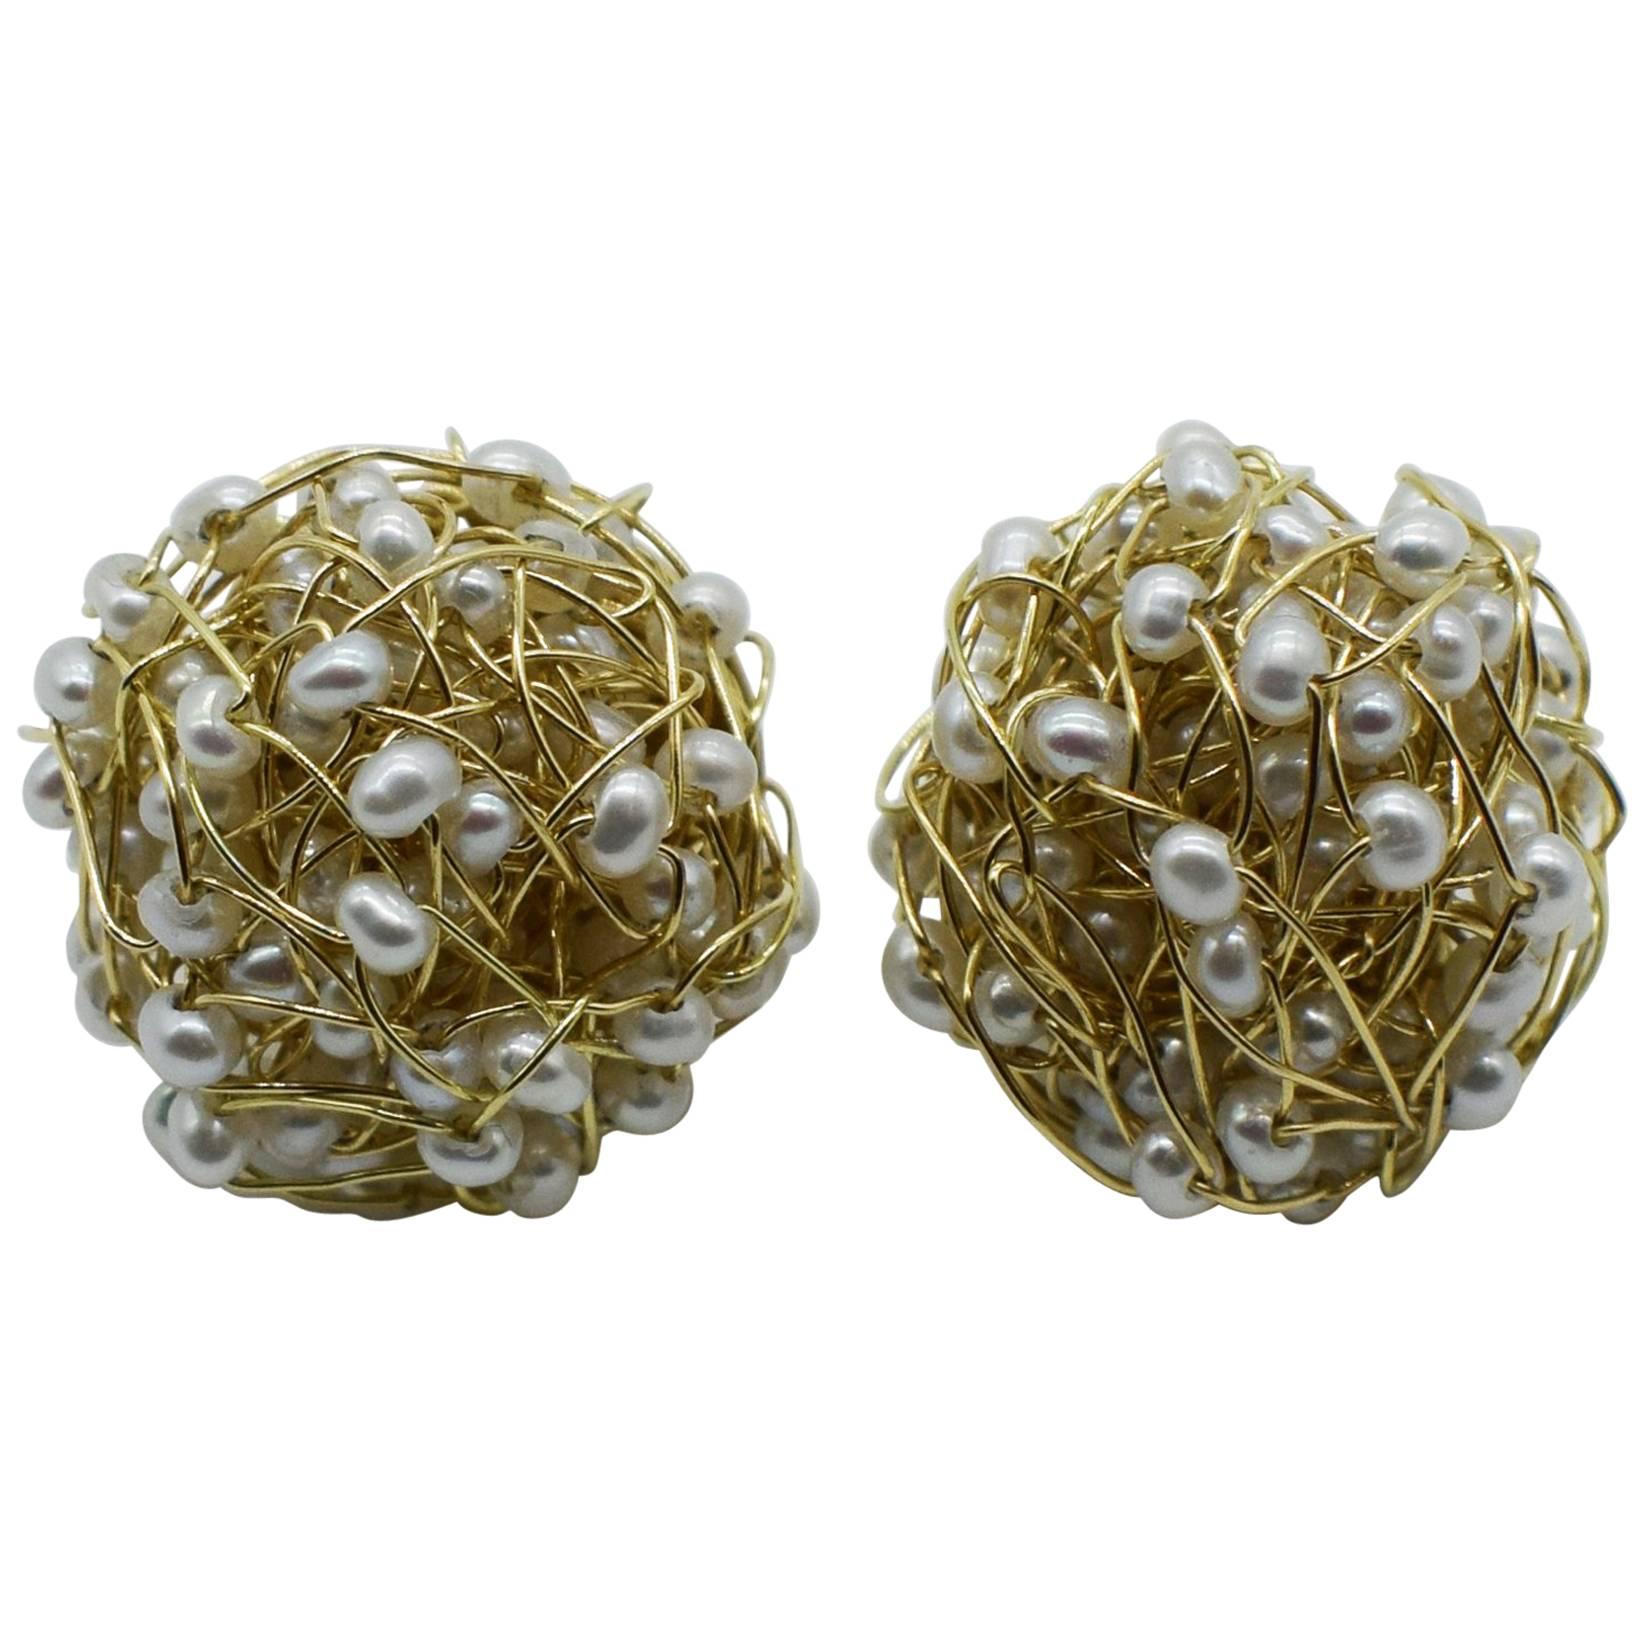 Kayo Saito 18 Karat Gold Pearl Cluster Stud Earrings, Mist Collection For Sale